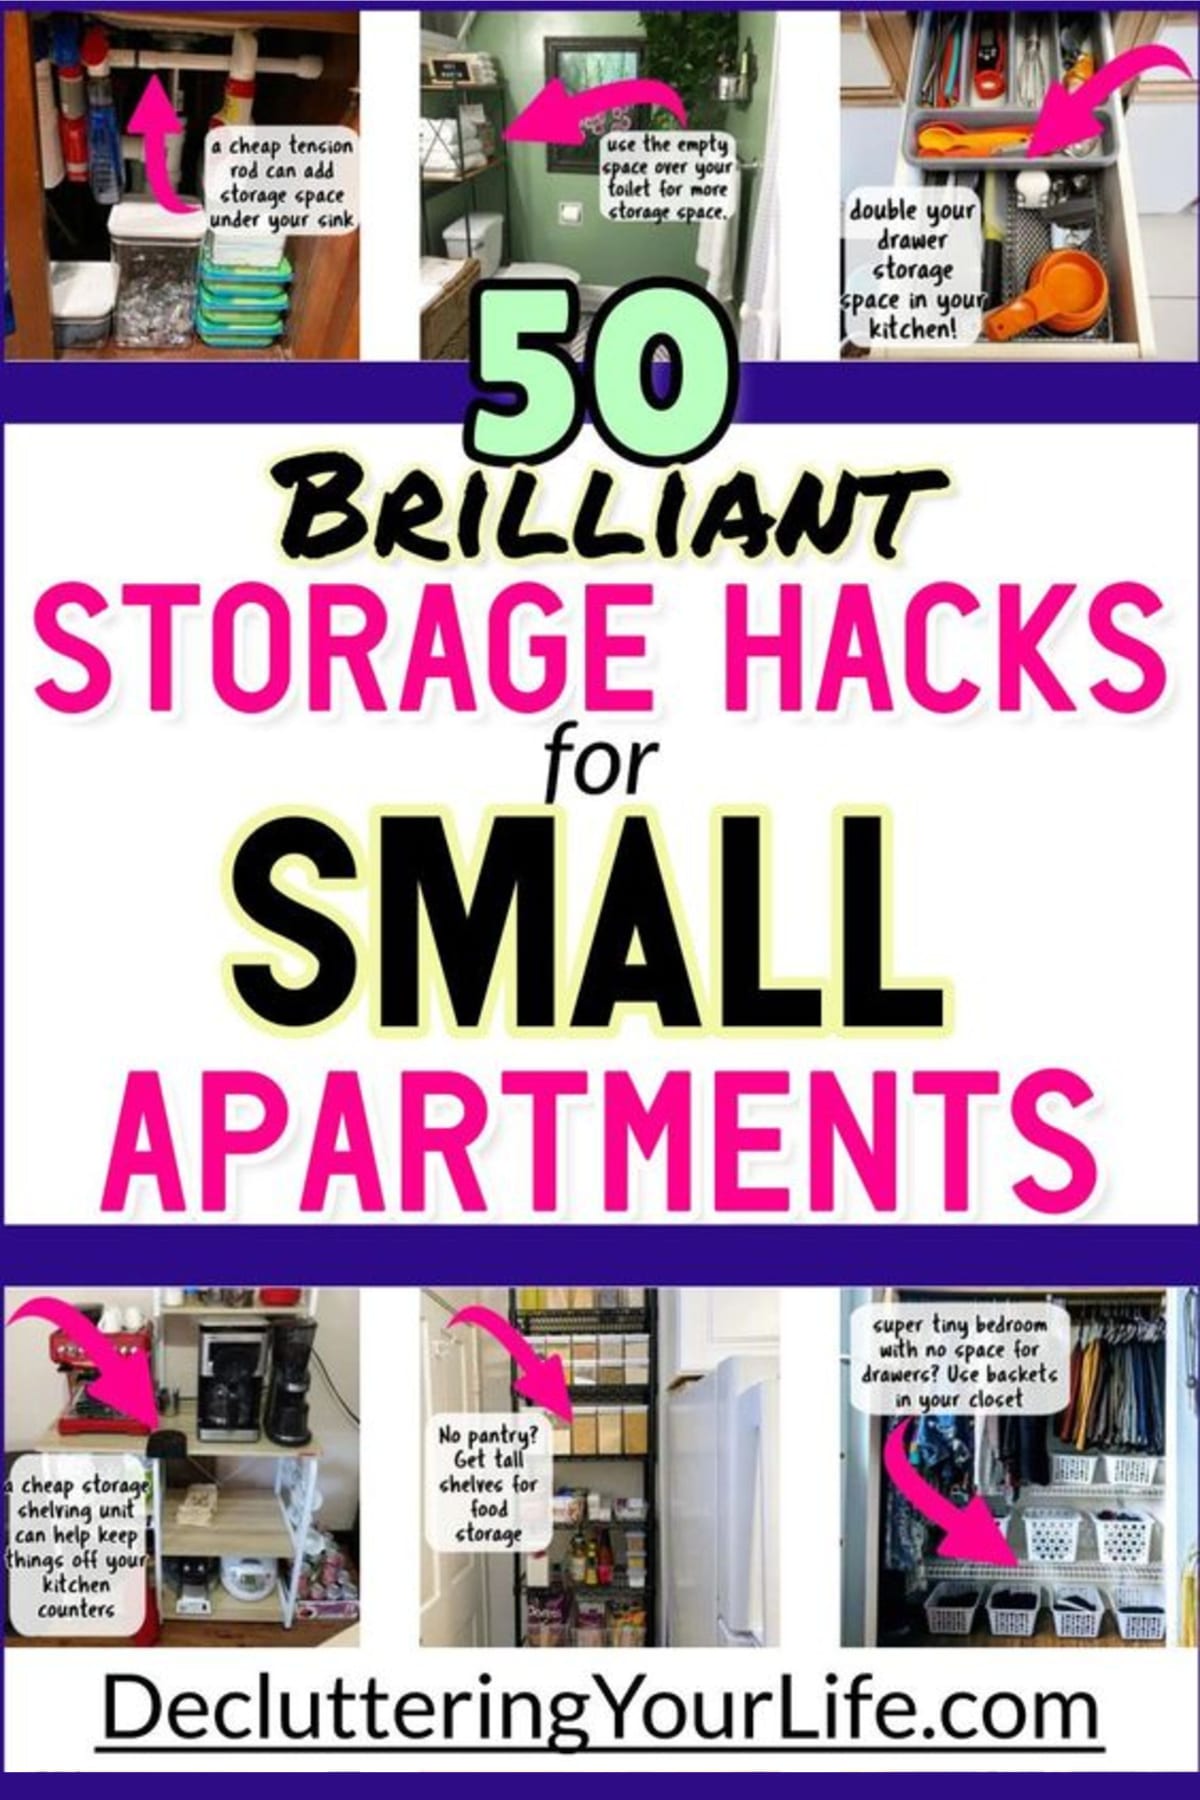 50 clever ways to organize a small apartment on a budget when your tiny rental, studio apartment or small house has NO storage space